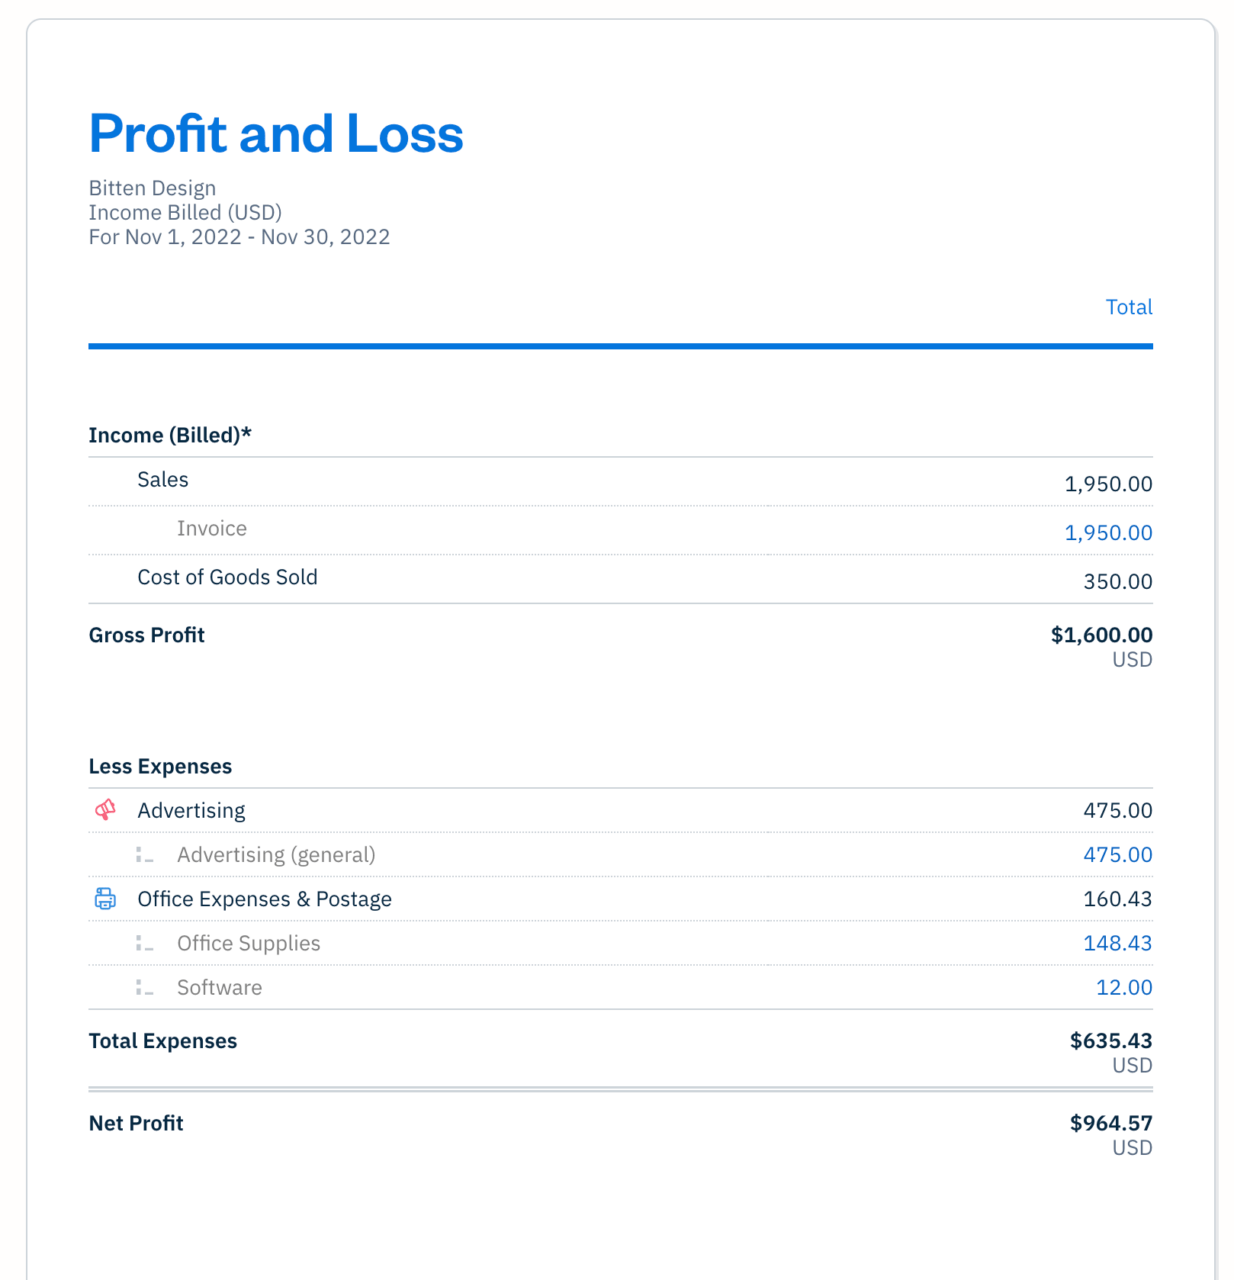 Profit and loss report example